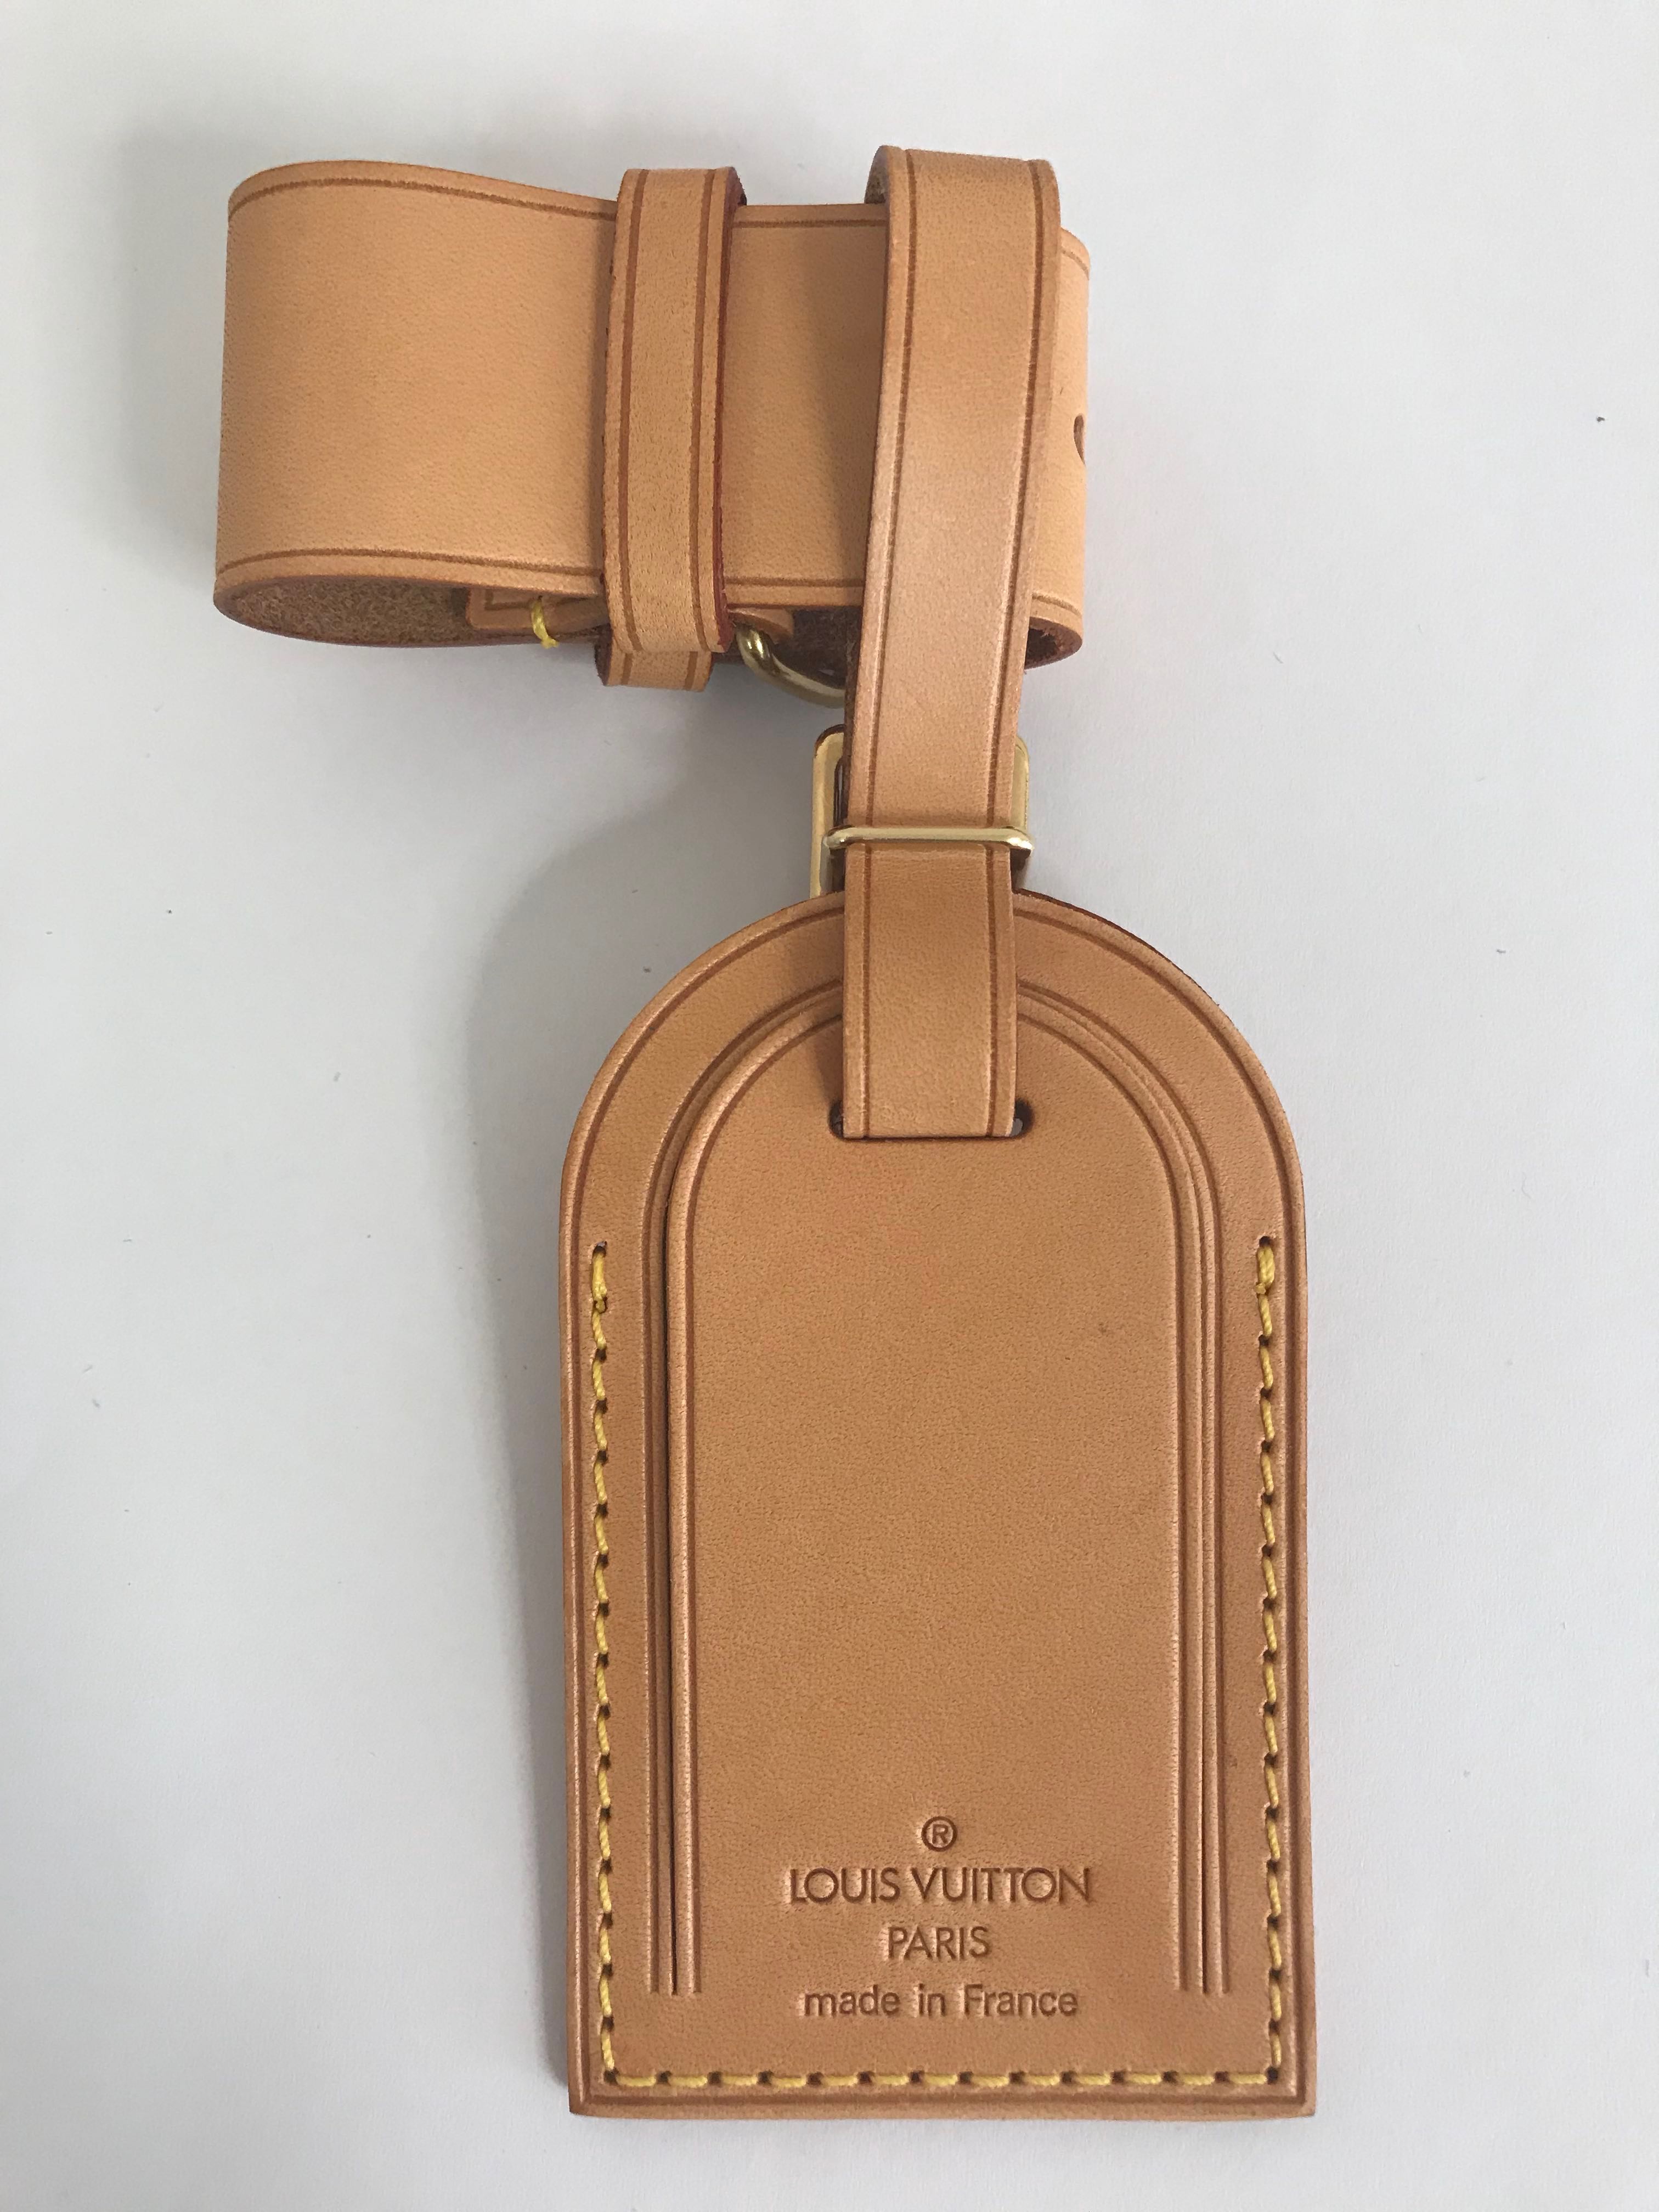 HOW TO GET A LV LUGGAGE TAG  Louis Vuitton Luggage Tags